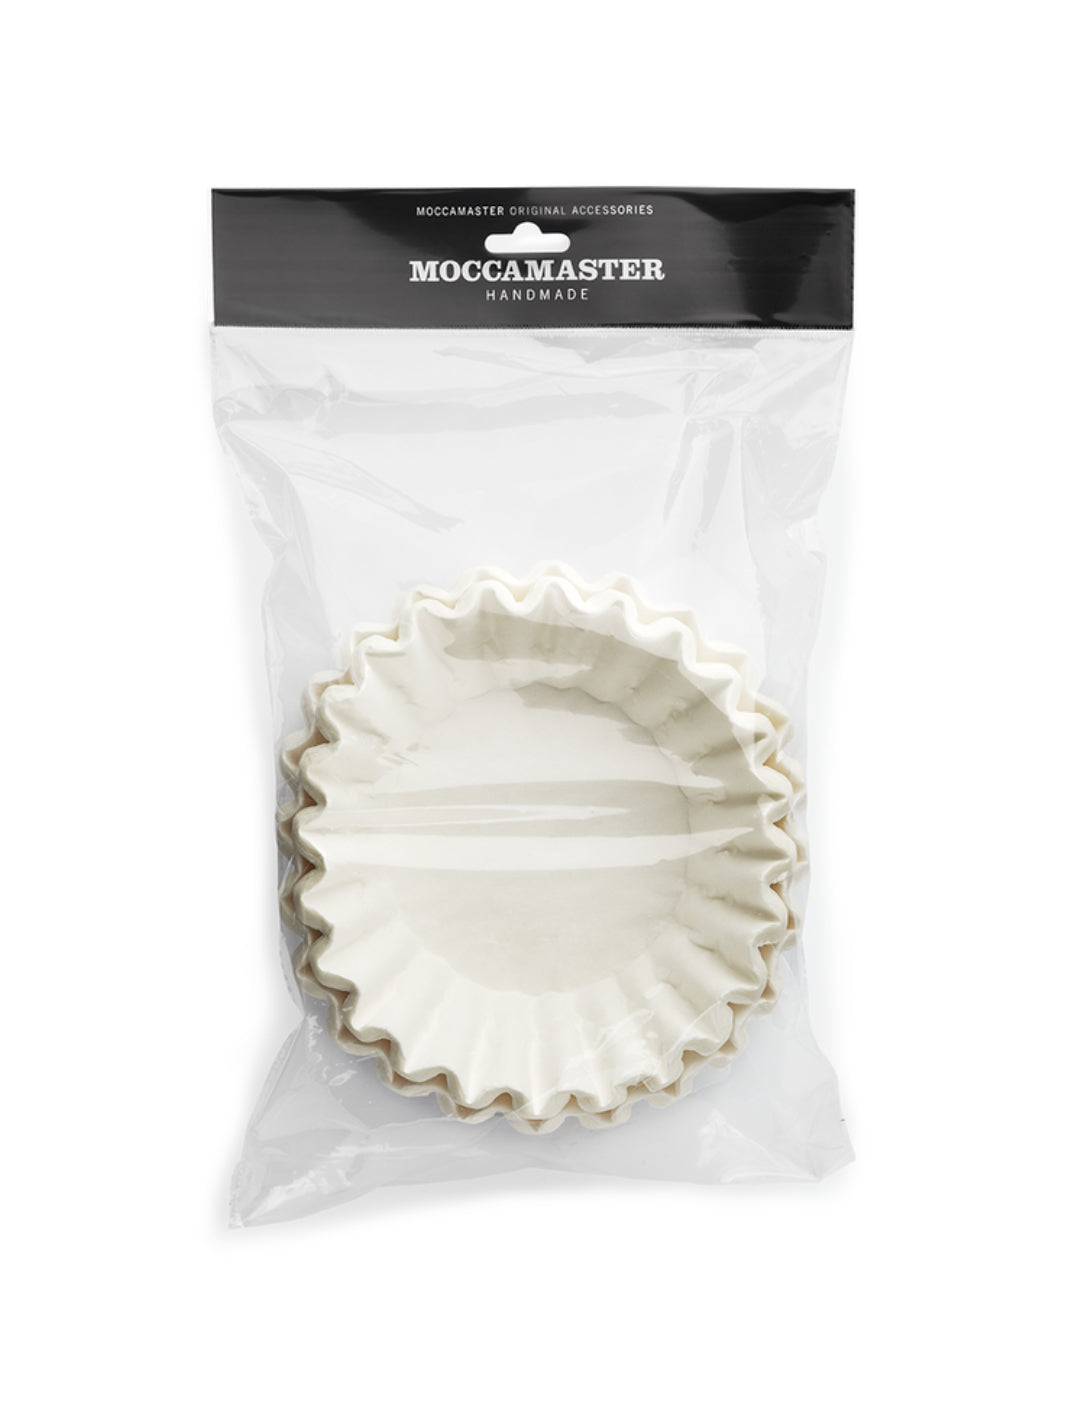 TECHNIVORM Moccamaster Grand Filters (100-Pack)